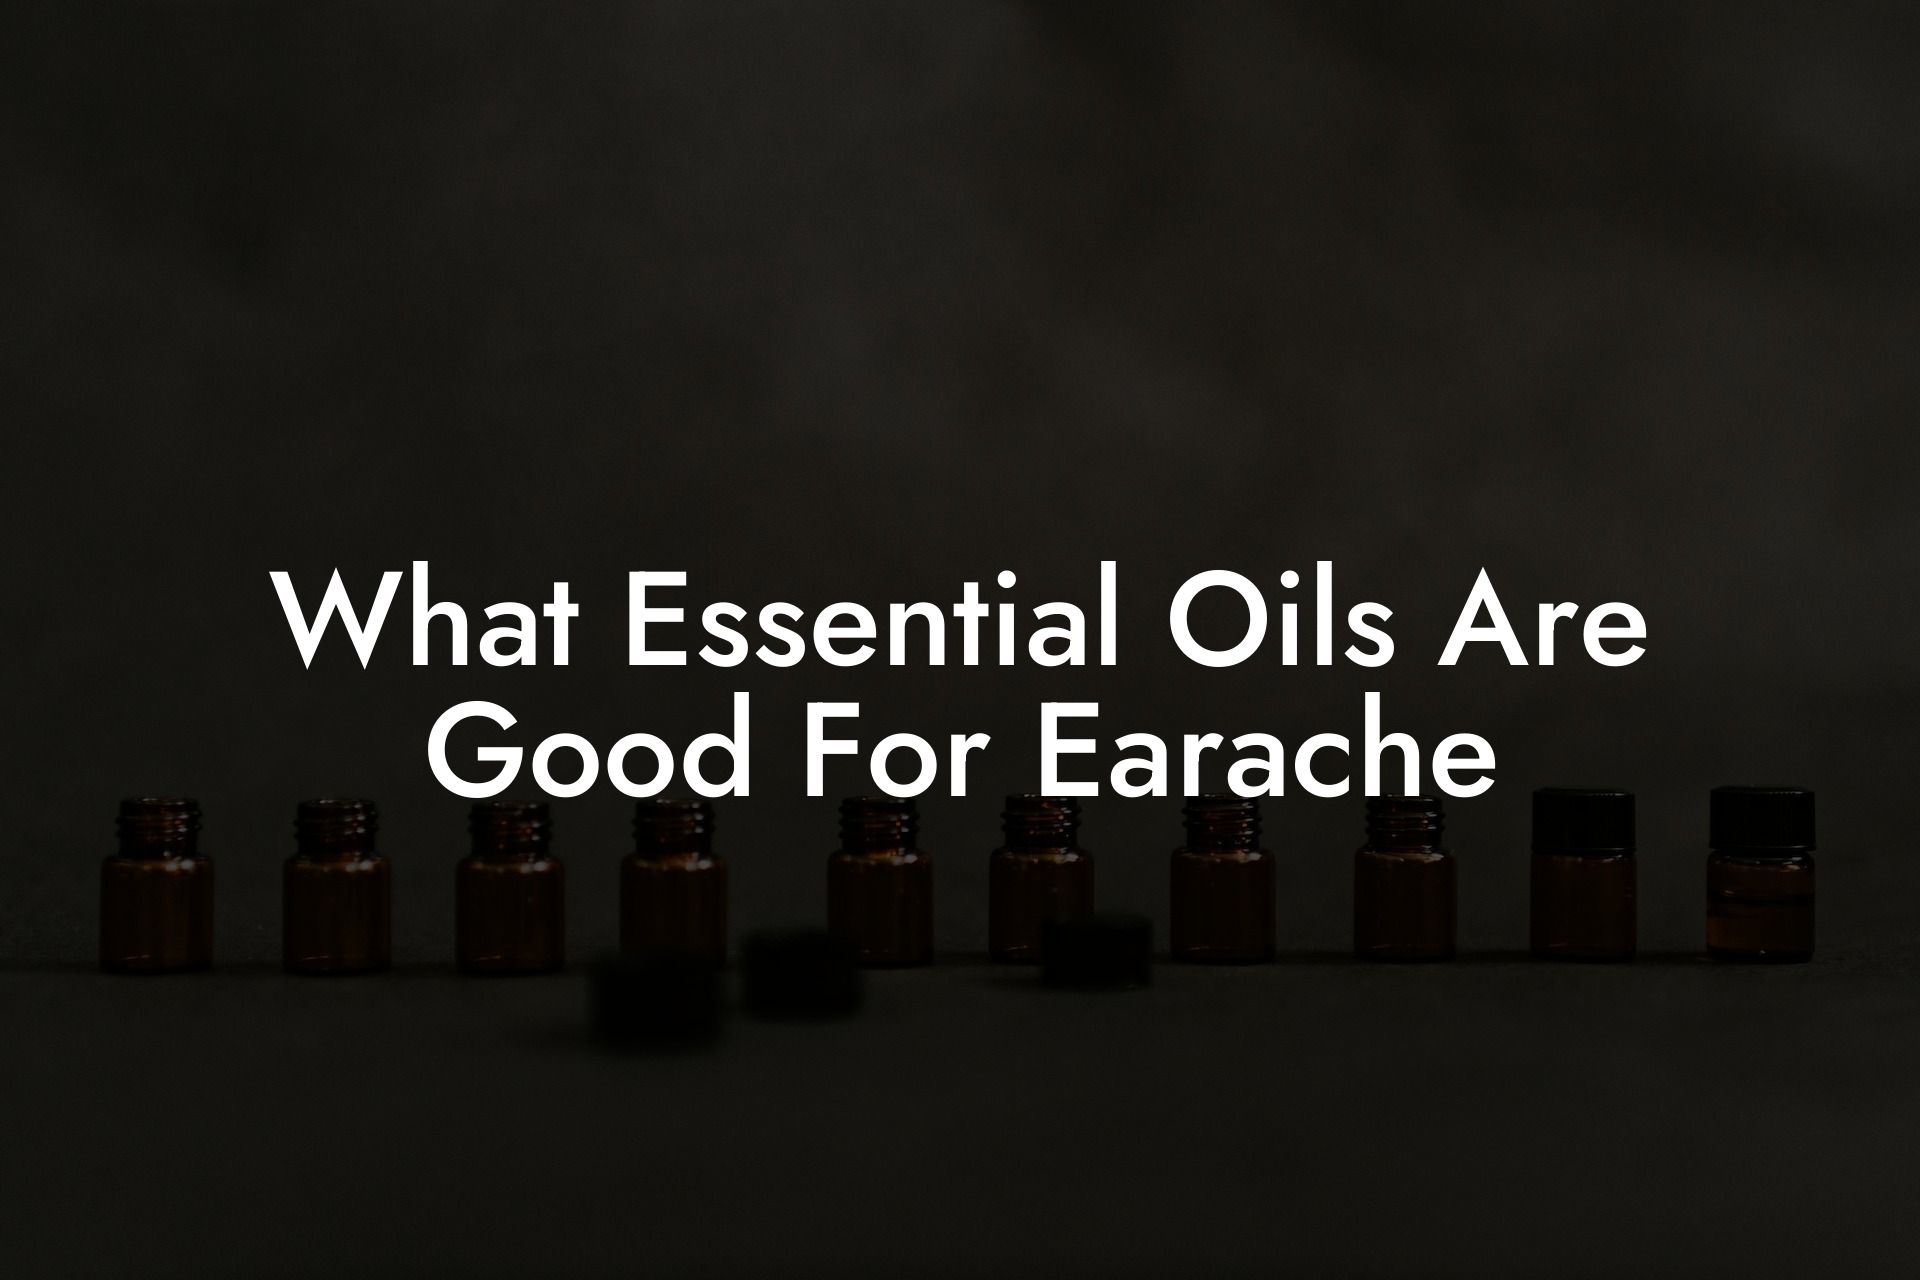 What Essential Oils Are Good For Earache